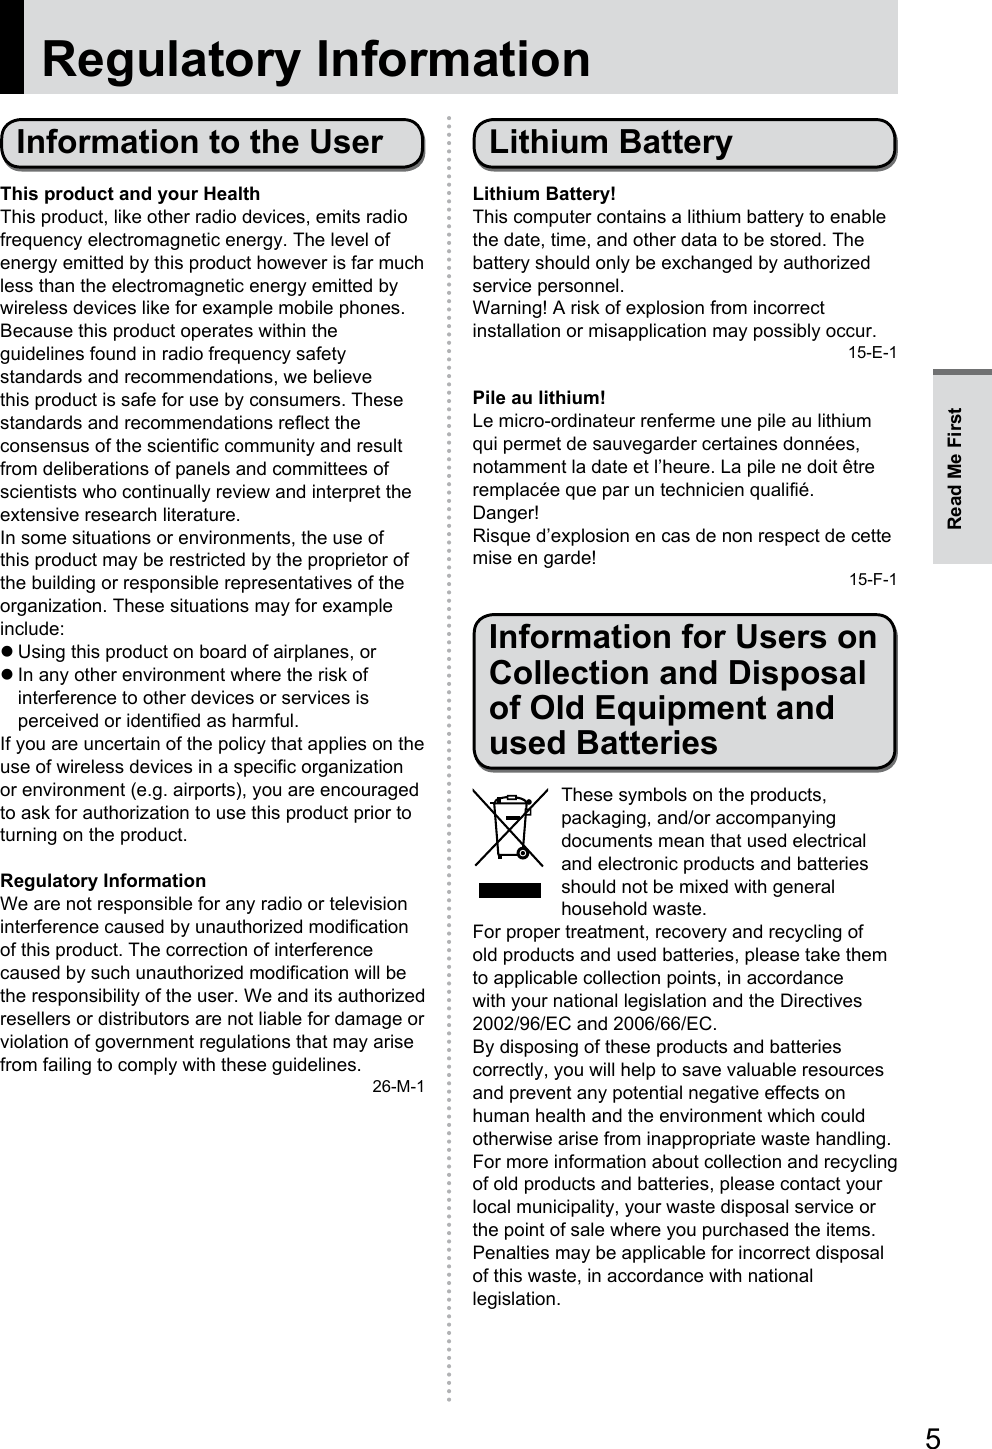 5Regulatory InformationInformation to the UserThis product and your HealthThis product, like other radio devices, emits radio frequency electromagnetic energy. The level of energy emitted by this product however is far much less than the electromagnetic energy emitted by wireless devices like for example mobile phones.Because this product operates within the guidelines found in radio frequency safety standards and recommendations, we believe this product is safe for use by consumers. These standards and recommendations reflect the consensus of the scientific community and result from deliberations of panels and committees of scientists who continually review and interpret the extensive research literature.In some situations or environments, the use of this product may be restricted by the proprietor of the building or responsible representatives of the organization. These situations may for example include: zUsing this product on board of airplanes, or zIn any other environment where the risk of interference to other devices or services is perceived or identified as harmful.If you are uncertain of the policy that applies on the use of wireless devices in a specific organization or environment (e.g. airports), you are encouraged to ask for authorization to use this product prior to turning on the product.Regulatory InformationWe are not responsible for any radio or television interference caused by unauthorized modification of this product. The correction of interference caused by such unauthorized modification will be the responsibility of the user. We and its authorized resellers or distributors are not liable for damage or violation of government regulations that may arise from failing to comply with these guidelines.26-M-1Lithium BatteryLithium Battery!This computer contains a lithium battery to enable the date, time, and other data to be stored. The battery should only be exchanged by authorized service personnel.Warning! A risk of explosion from incorrect installation or misapplication may possibly occur.15-E-1Pile au lithium!Le micro-ordinateur renferme une pile au lithium qui permet de sauvegarder certaines données, notamment la date et l’heure. La pile ne doit être remplacée que par un technicien qualifié.Danger!Risque d’explosion en cas de non respect de cette mise en garde!15-F-1Information for Users on Collection and Disposal of Old Equipment and used BatteriesThese symbols on the products, packaging, and/or accompanying documents mean that used electrical and electronic products and batteries should not be mixed with general household waste.For proper treatment, recovery and recycling of old products and used batteries, please take them to applicable collection points, in accordance with your national legislation and the Directives 2002/96/EC and 2006/66/EC.By disposing of these products and batteries correctly, you will help to save valuable resources and prevent any potential negative effects on human health and the environment which could otherwise arise from inappropriate waste handling.For more information about collection and recycling of old products and batteries, please contact your local municipality, your waste disposal service or the point of sale where you purchased the items.Penalties may be applicable for incorrect disposal of this waste, in accordance with national legislation.Read Me First